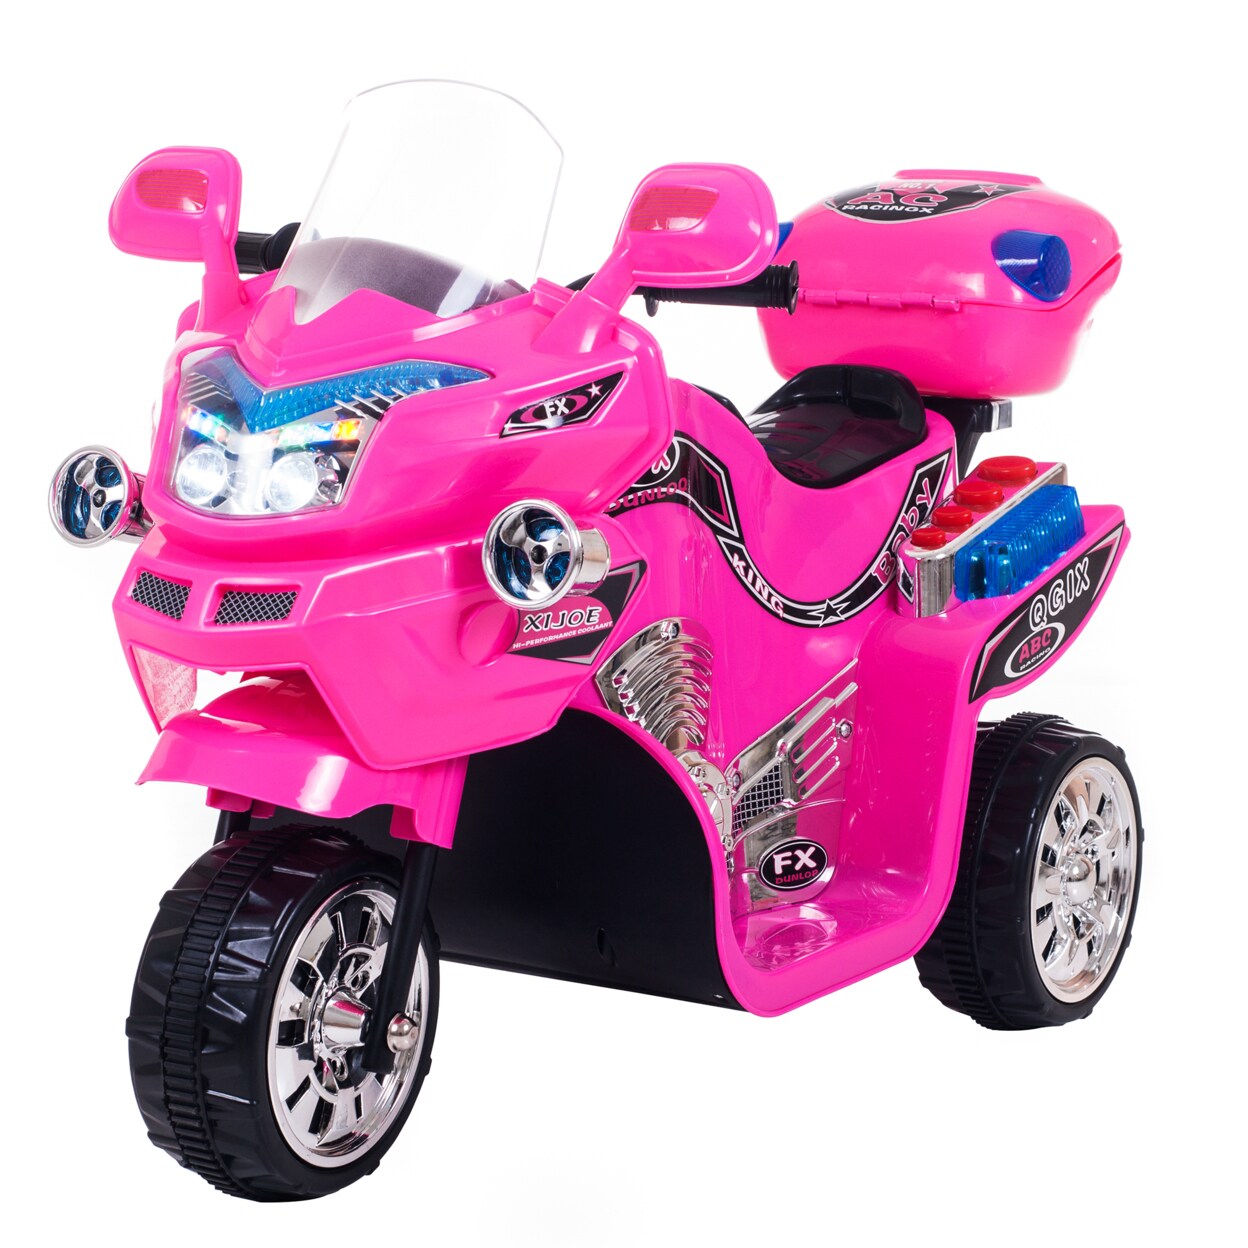 Lil Rider   FX 3 Motorcycle Wheel Battery Powered Bike - Pink Ride on Toy 2-4 Yrs Toddler